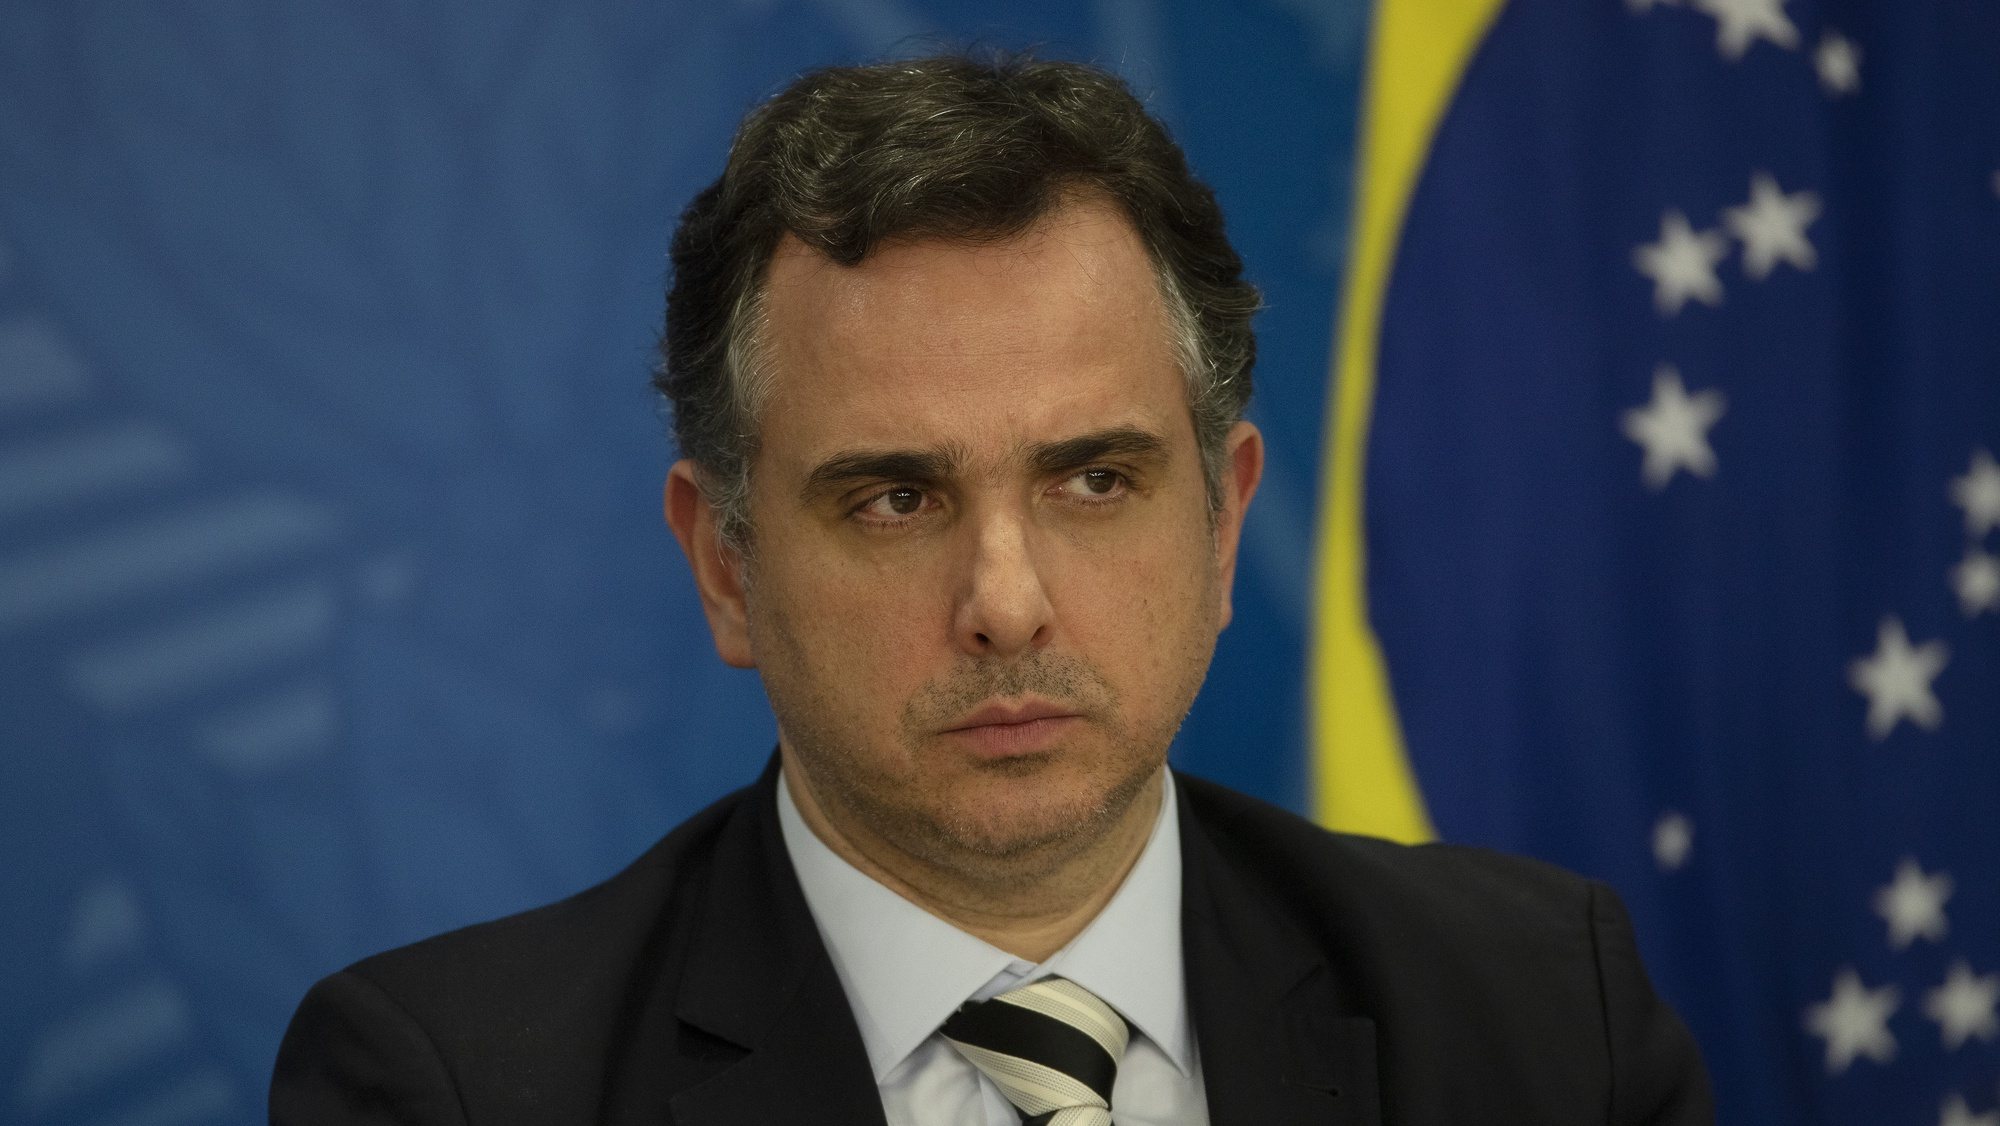 epa09999791 The President of the Brazilian Senate, Rodrigo Pacheco, takes part in a press conference on policies to control fuel prices, at the Planalto Palace in Brasilia, Brazil, 06 June 2022. Bolsonaro announced that the Federal Government will reimburse the states for the loss of income that would derive from the bill that establishes a maximum rate for the tax on fuels. The President also announced that his Government will demand in return that the states reduce the ICMS tax rate on diesel to zero.  EPA/Joedson Alves